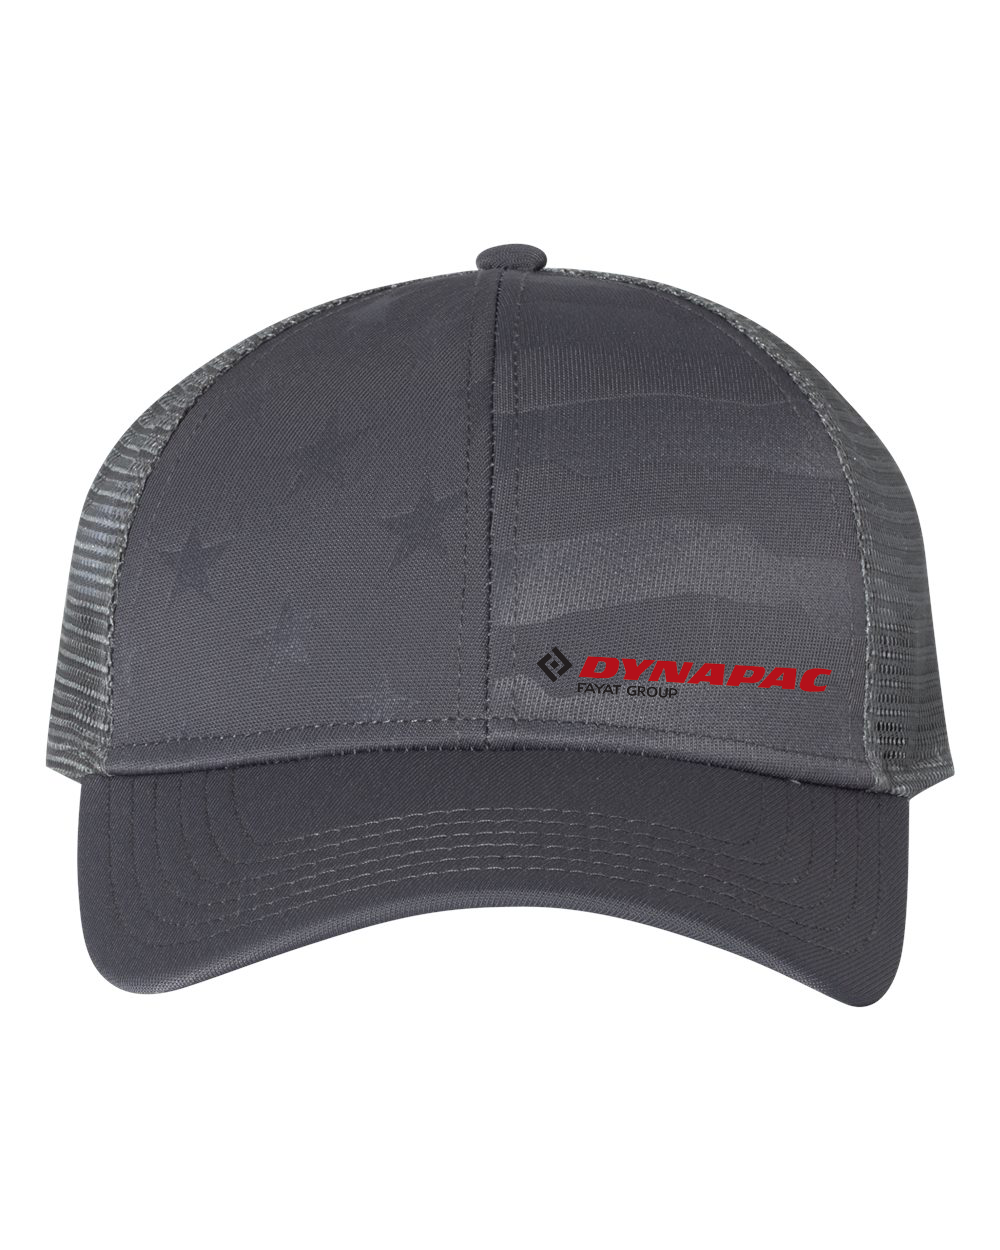 custom design of Outdoor Cap USA750M - Debossed Stars and Stripes with Mesh Back